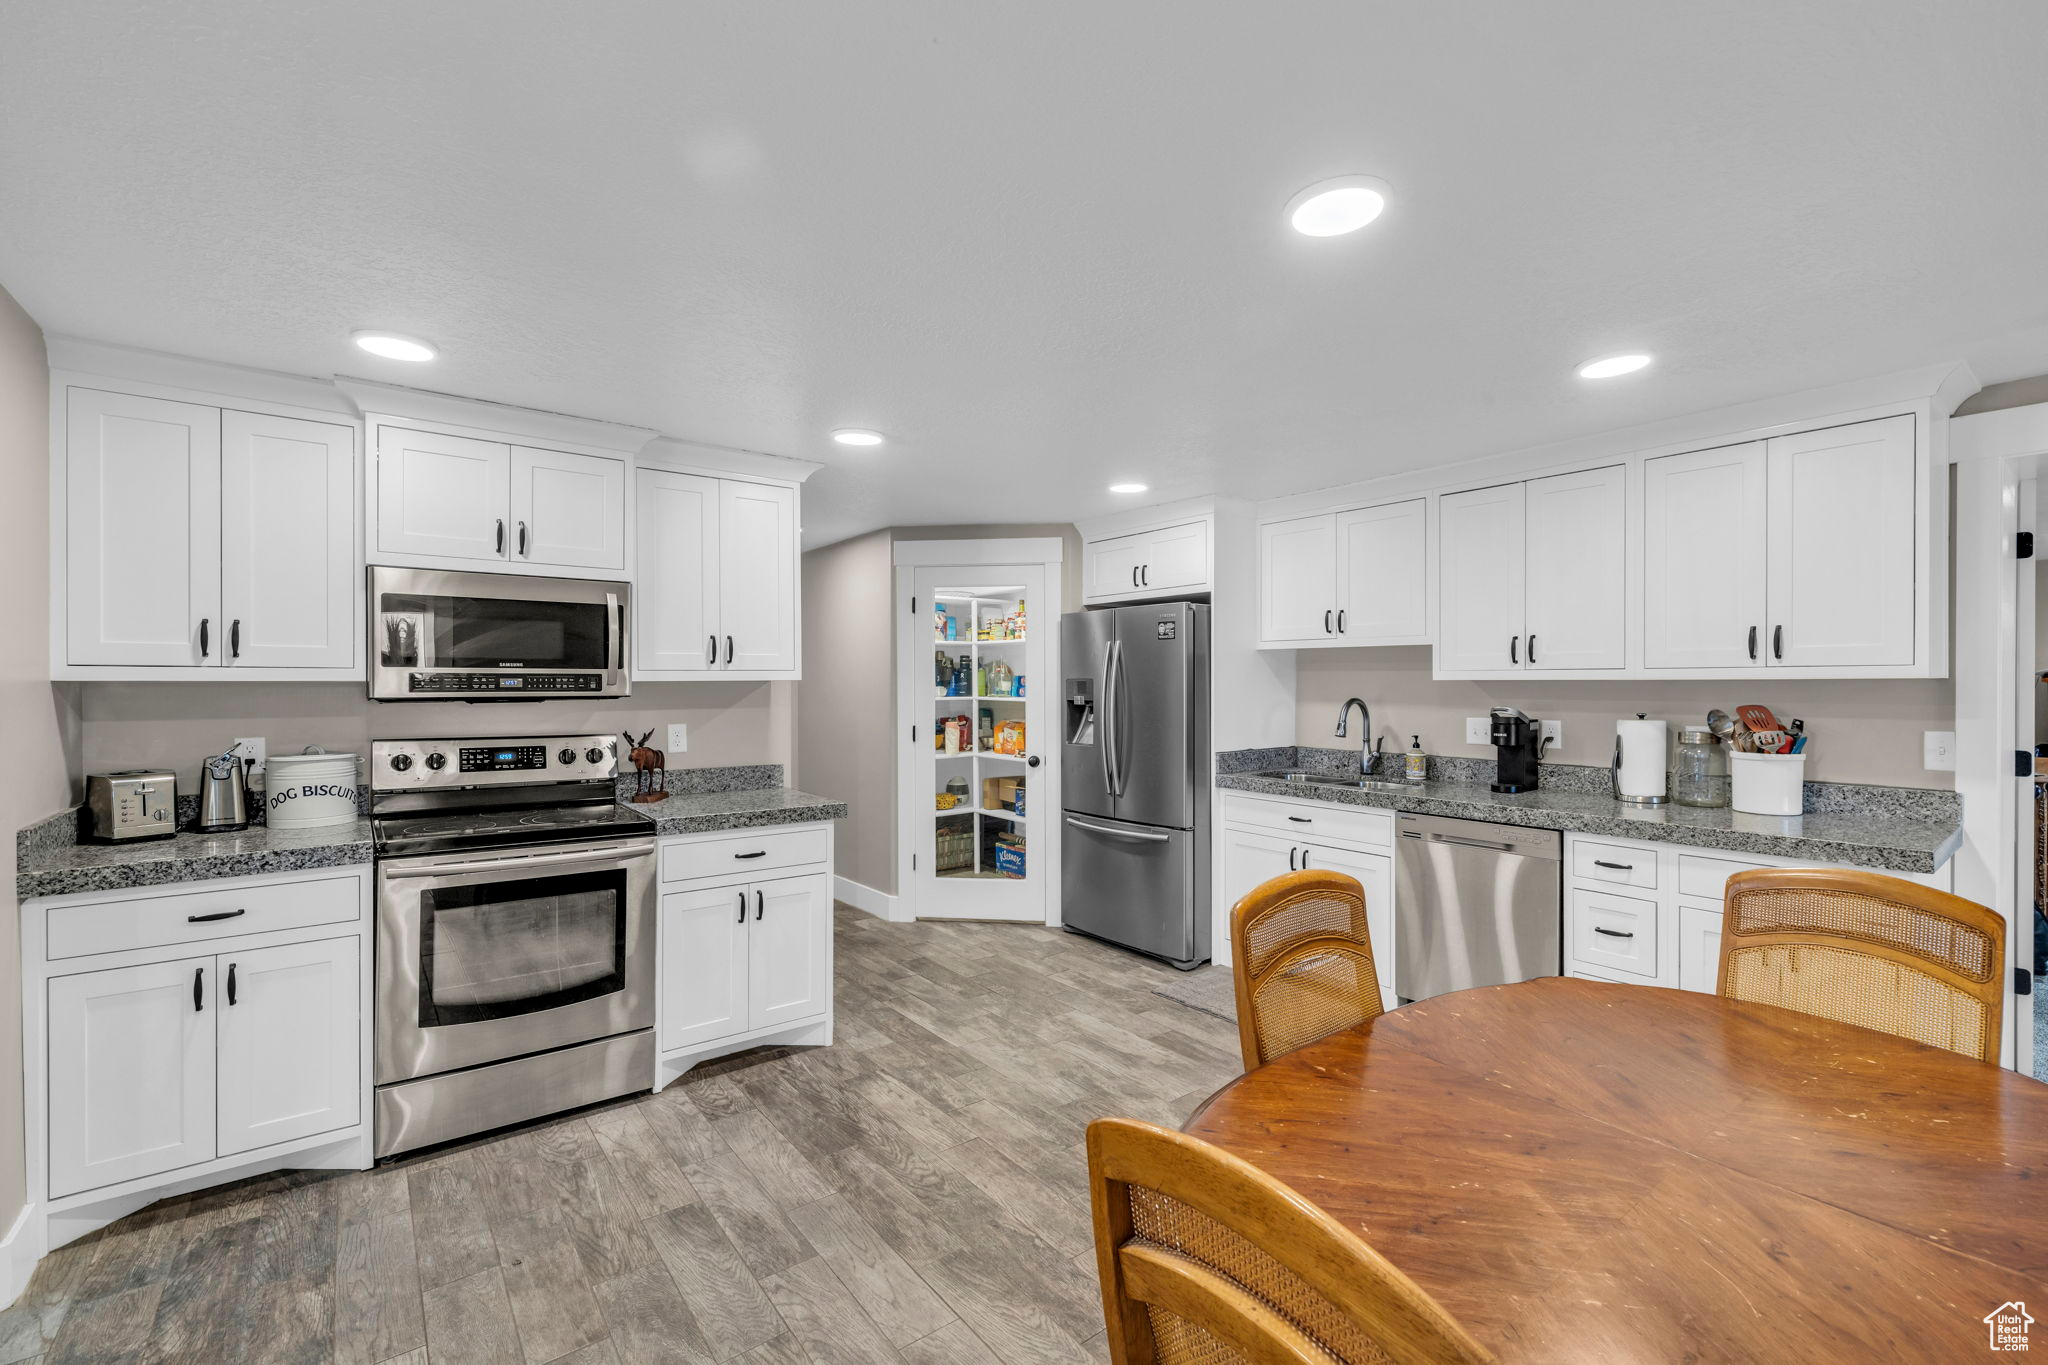 Kitchen featuring light wood-type flooring, appliances with stainless steel finishes, light stone counters, and white cabinetry